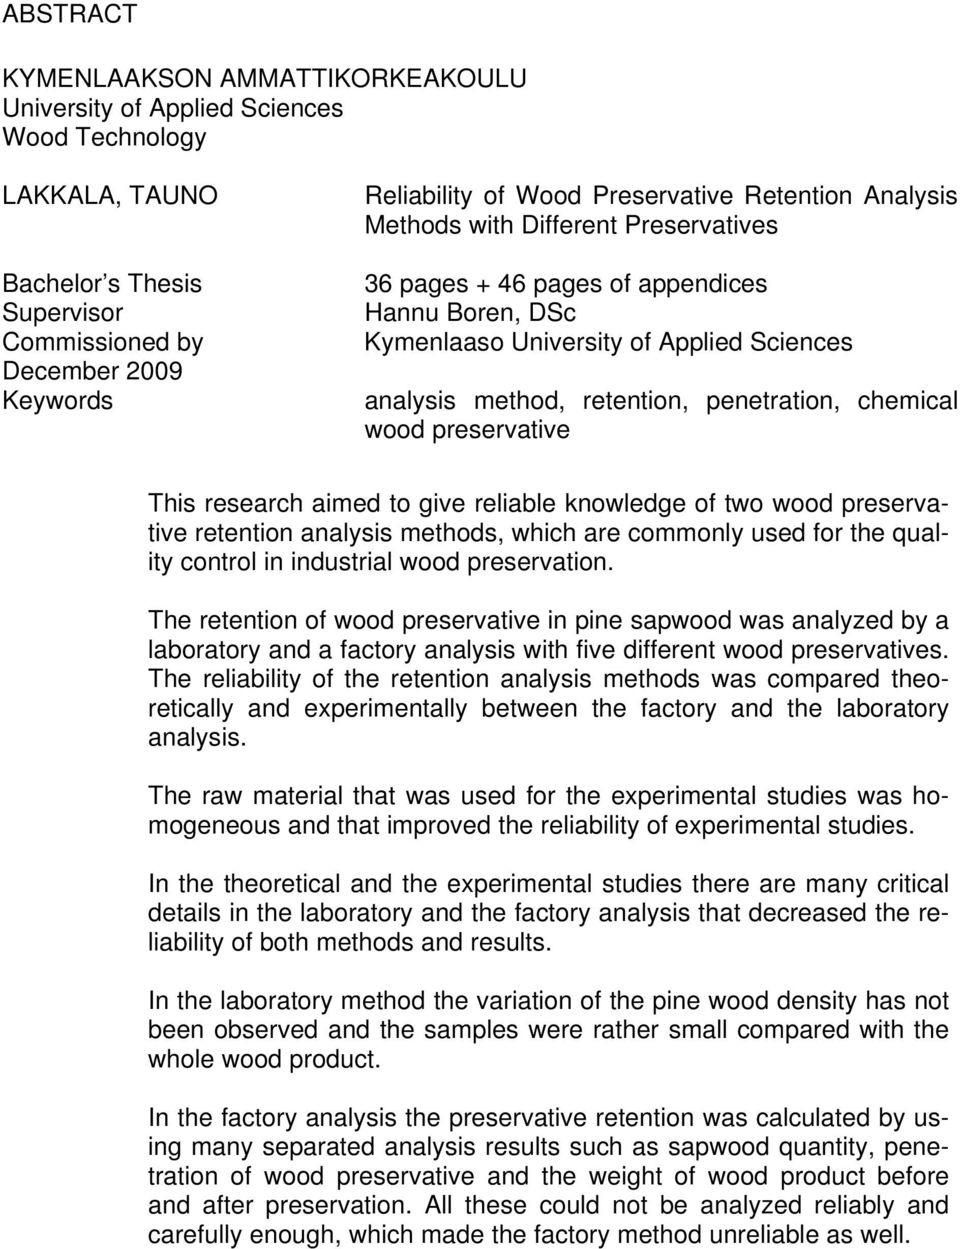 penetration, chemical wood preservative This research aimed to give reliable knowledge of two wood preservative retention analysis methods, which are commonly used for the quality control in